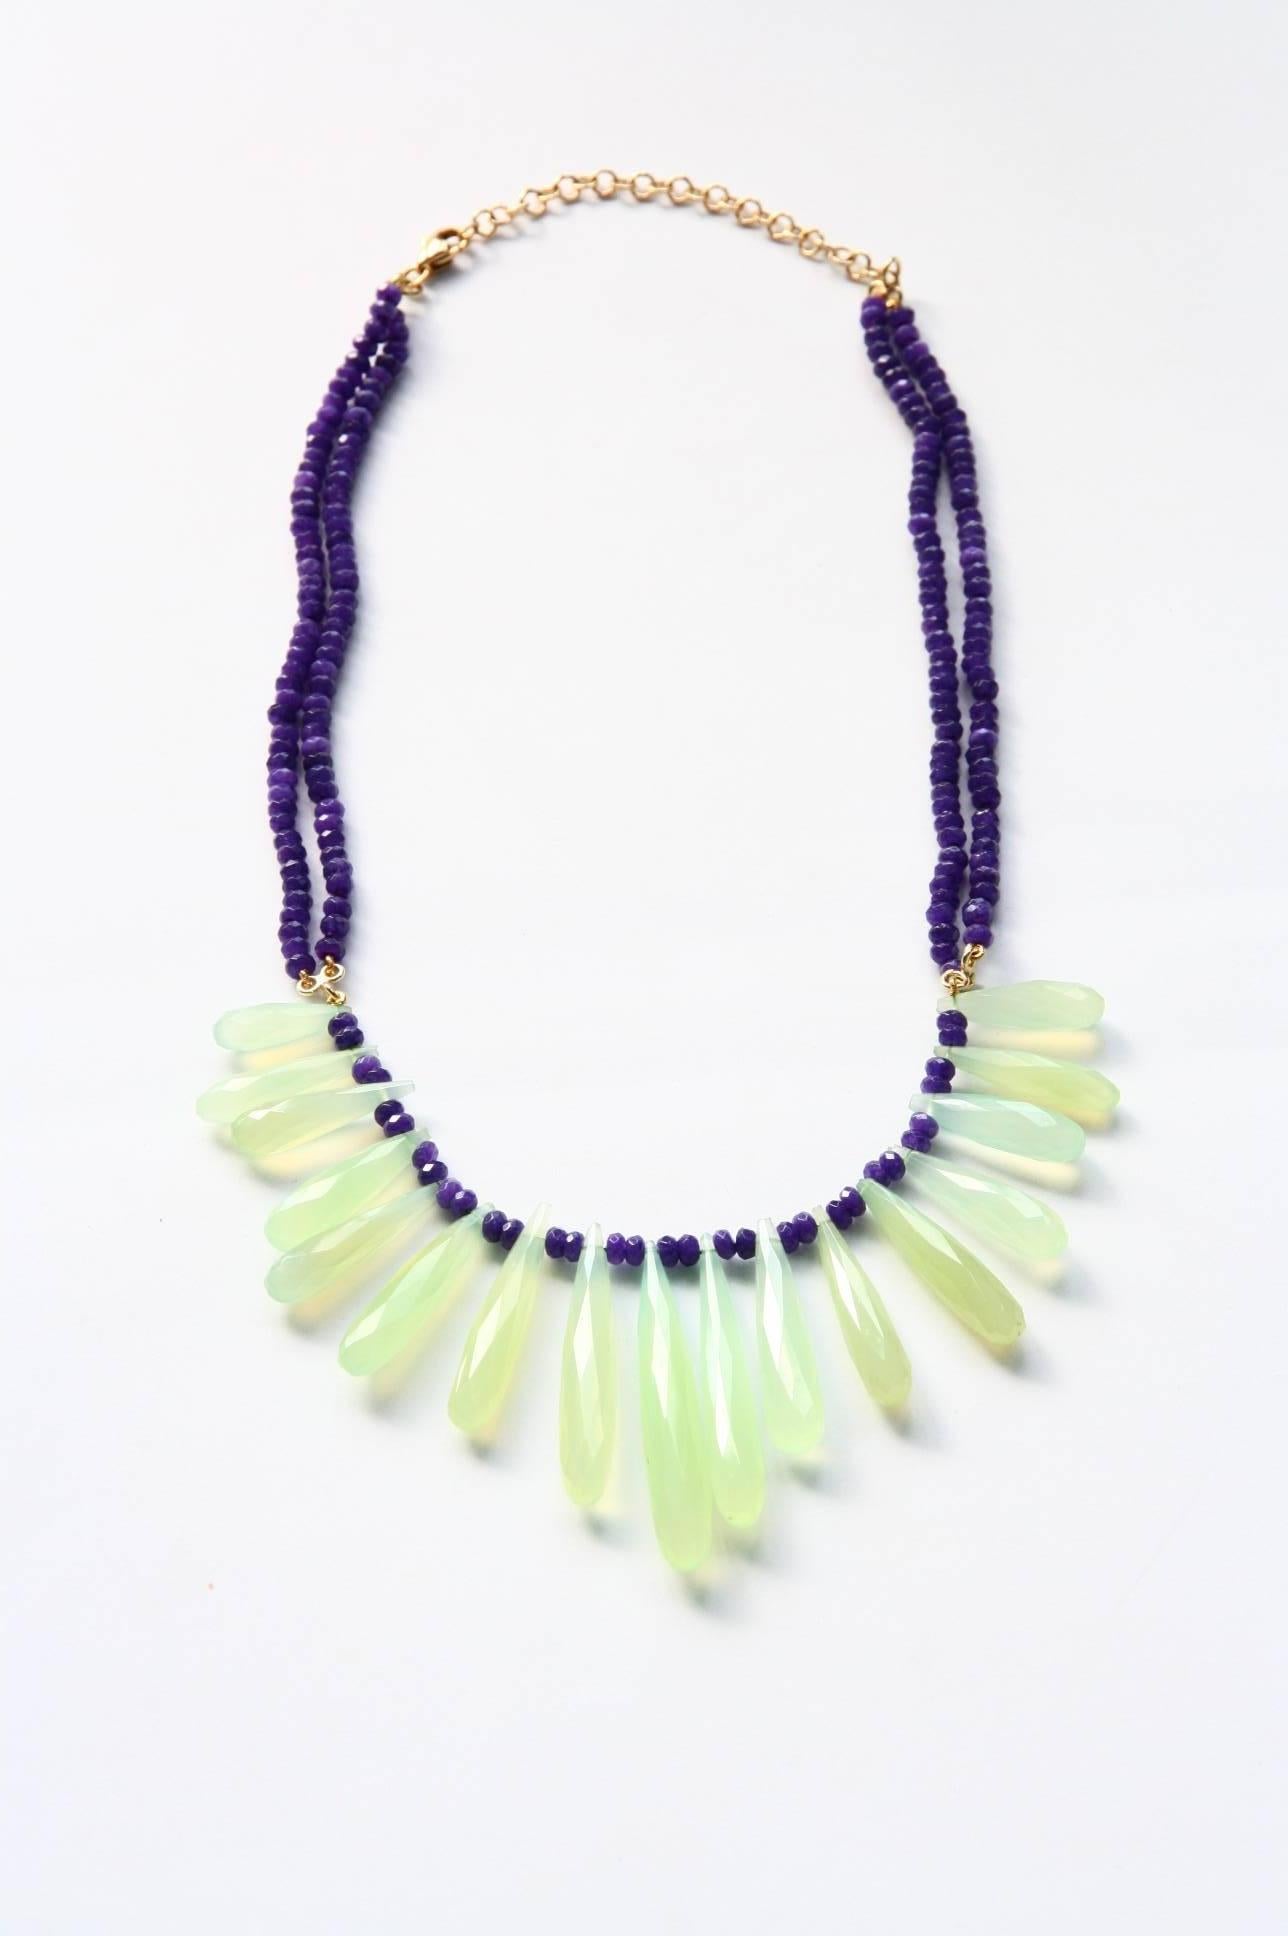 Fantastic necklace with amazing green scalar faced drops, amethyst, 18kt gold gr, 6,80.
The length is adjustable.
All Giulia Colussi jewelry is new and has never been previously owned or worn. Each item will arrive at your door beautifully gift